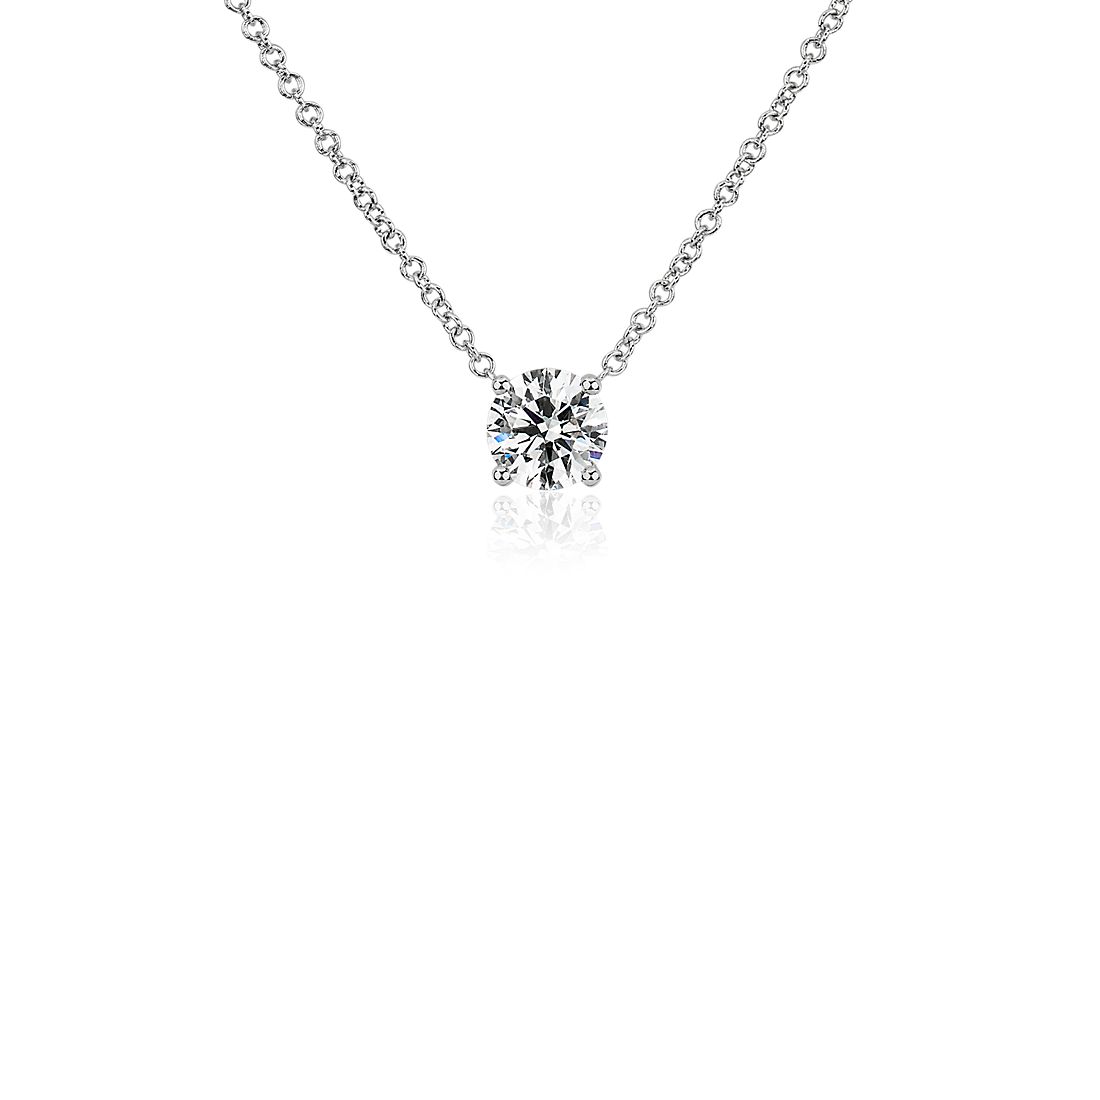 Lab Grown Diamond Floating Solitaire Pendant in 14k White Gold (3/4 ct. tw.)